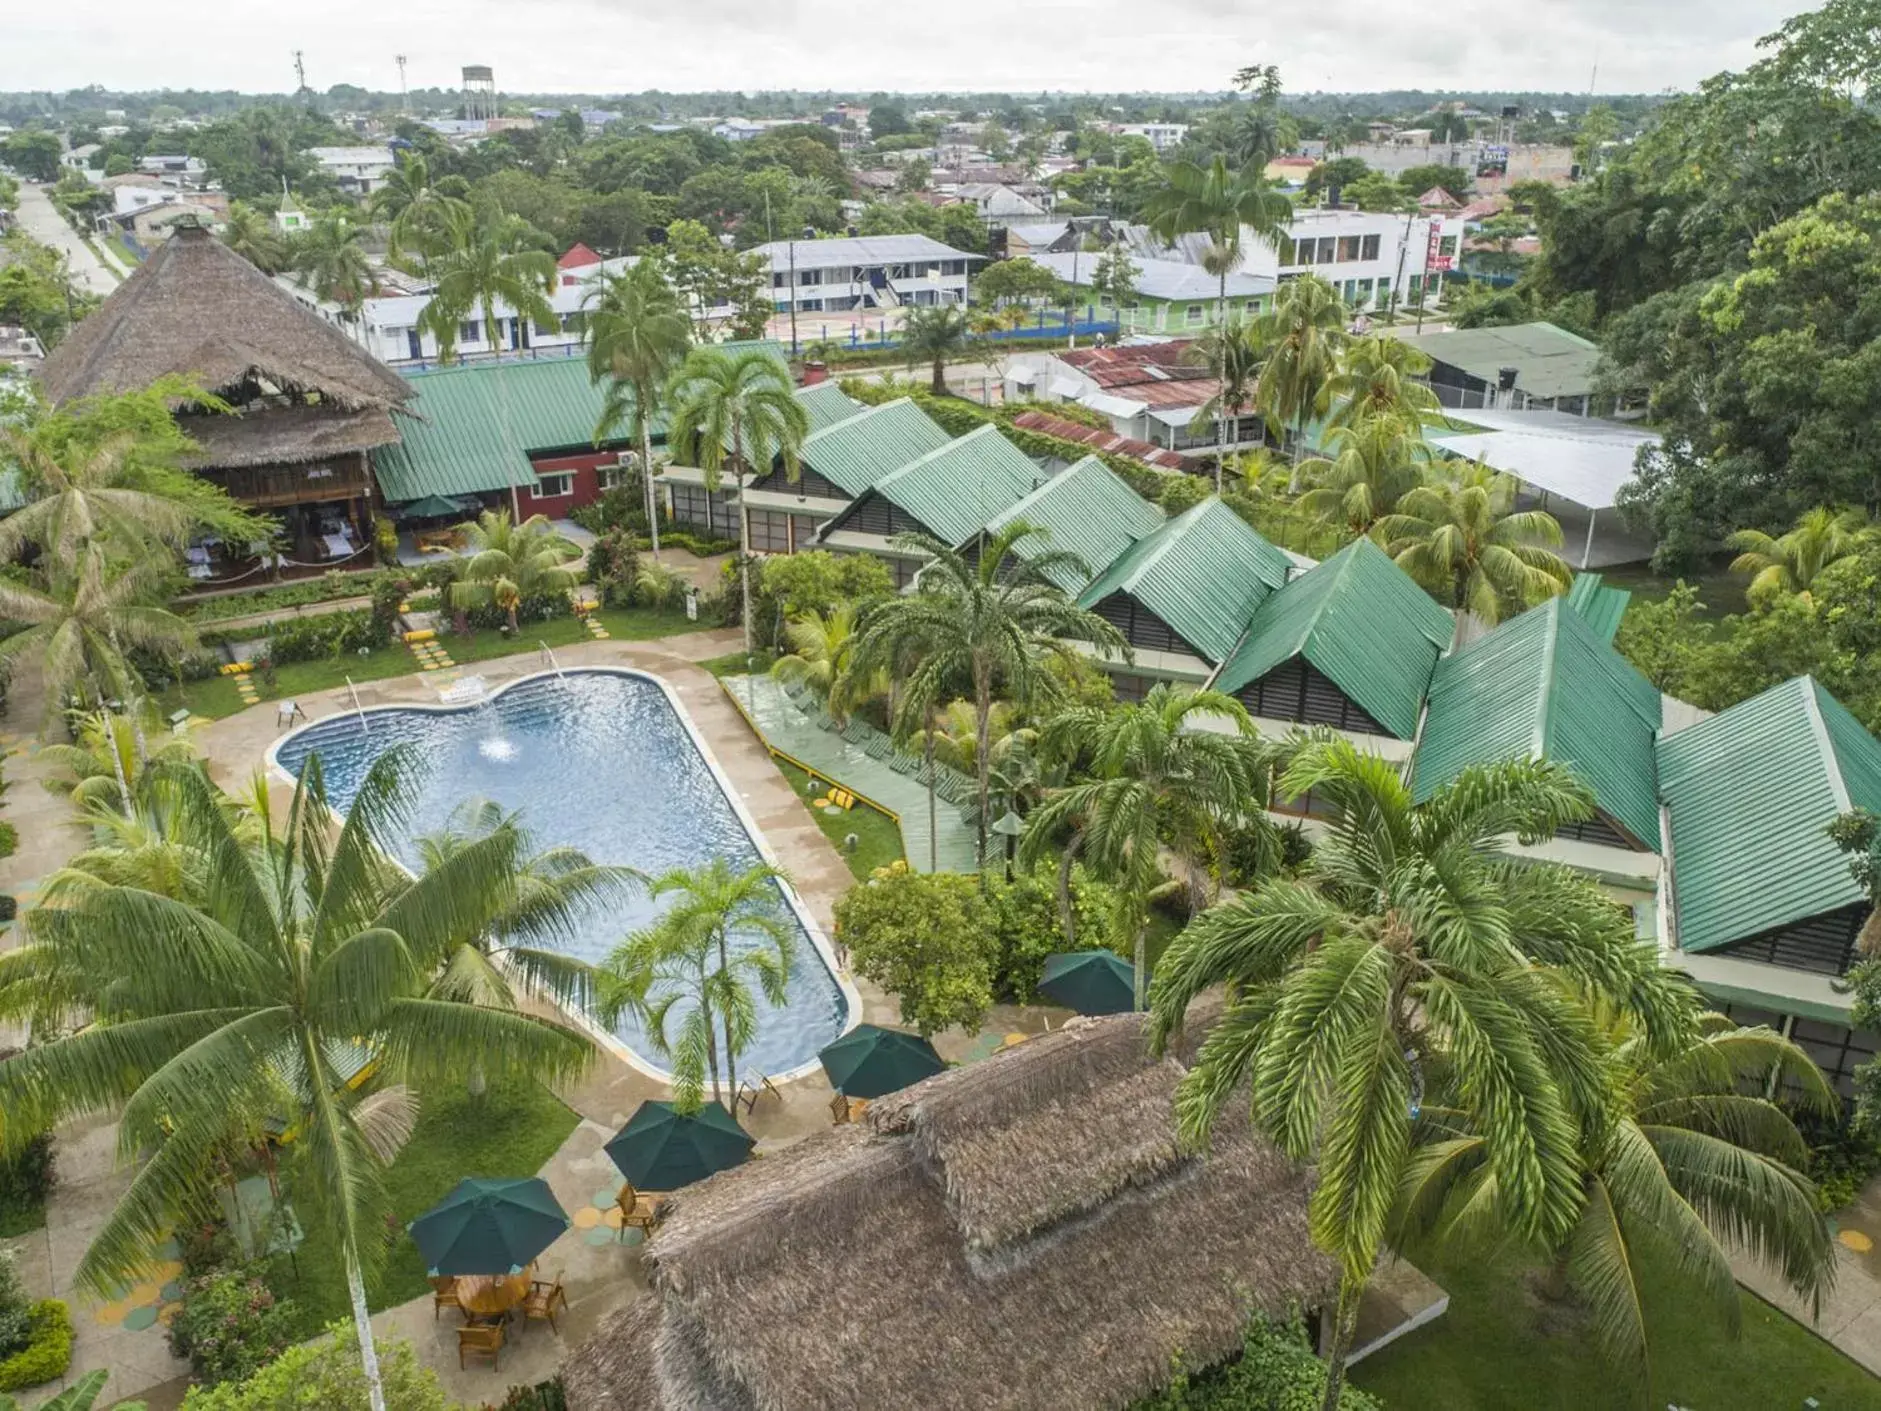 Off site, Bird's-eye View in Decameron Decalodge Ticuna